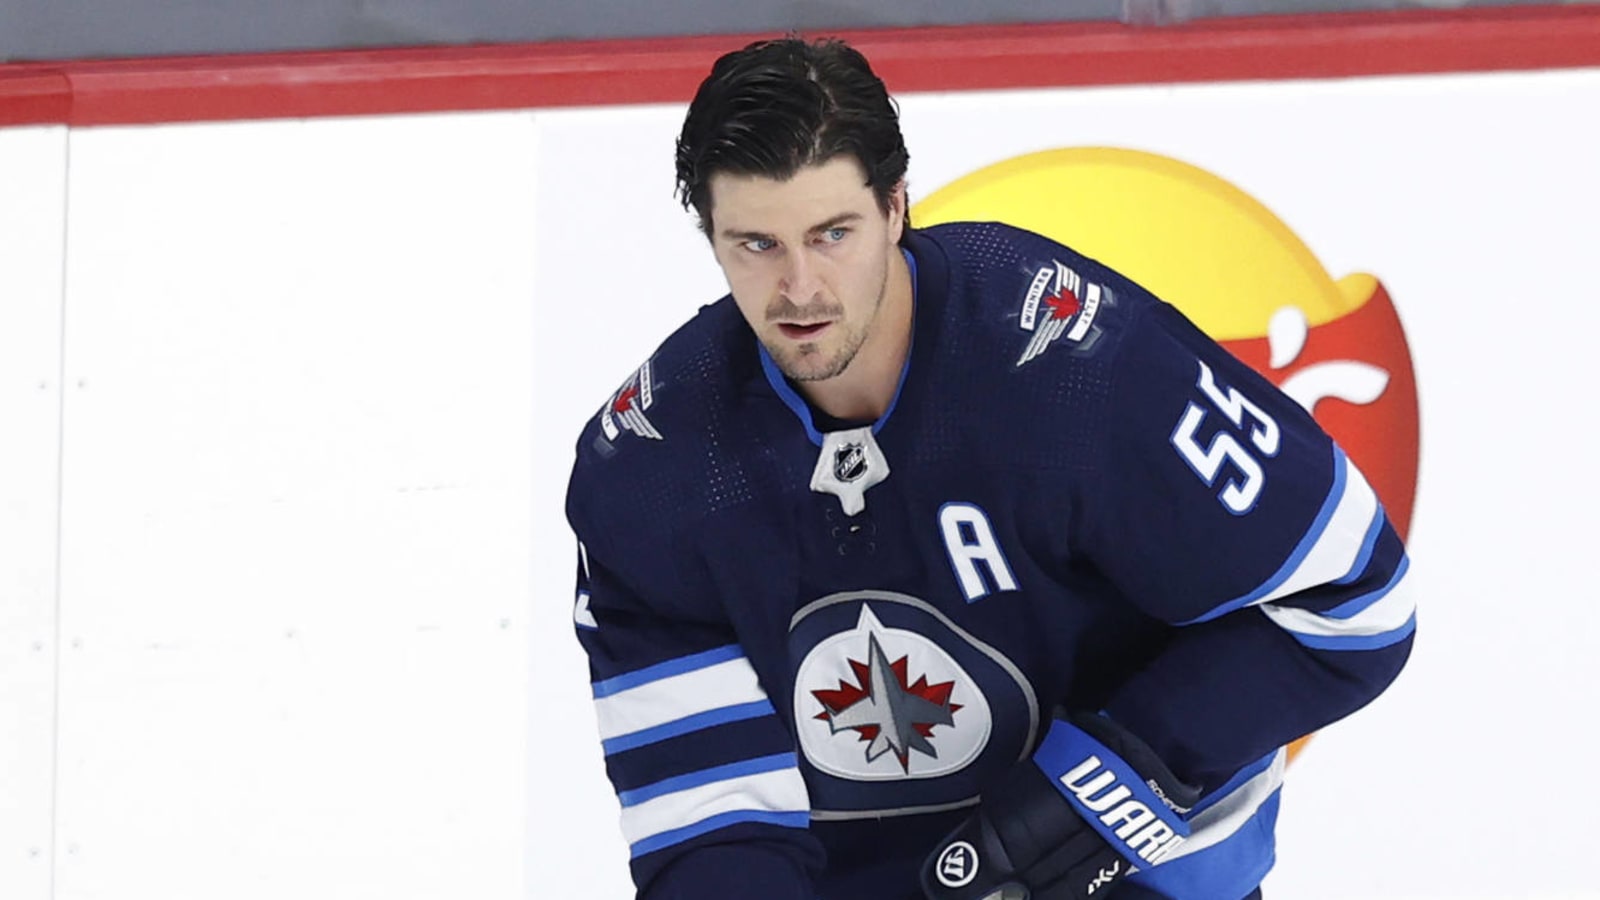 Jets' Mark Scheifele joins Blake Wheeler on COVID-19 list, could be cleared Thursday